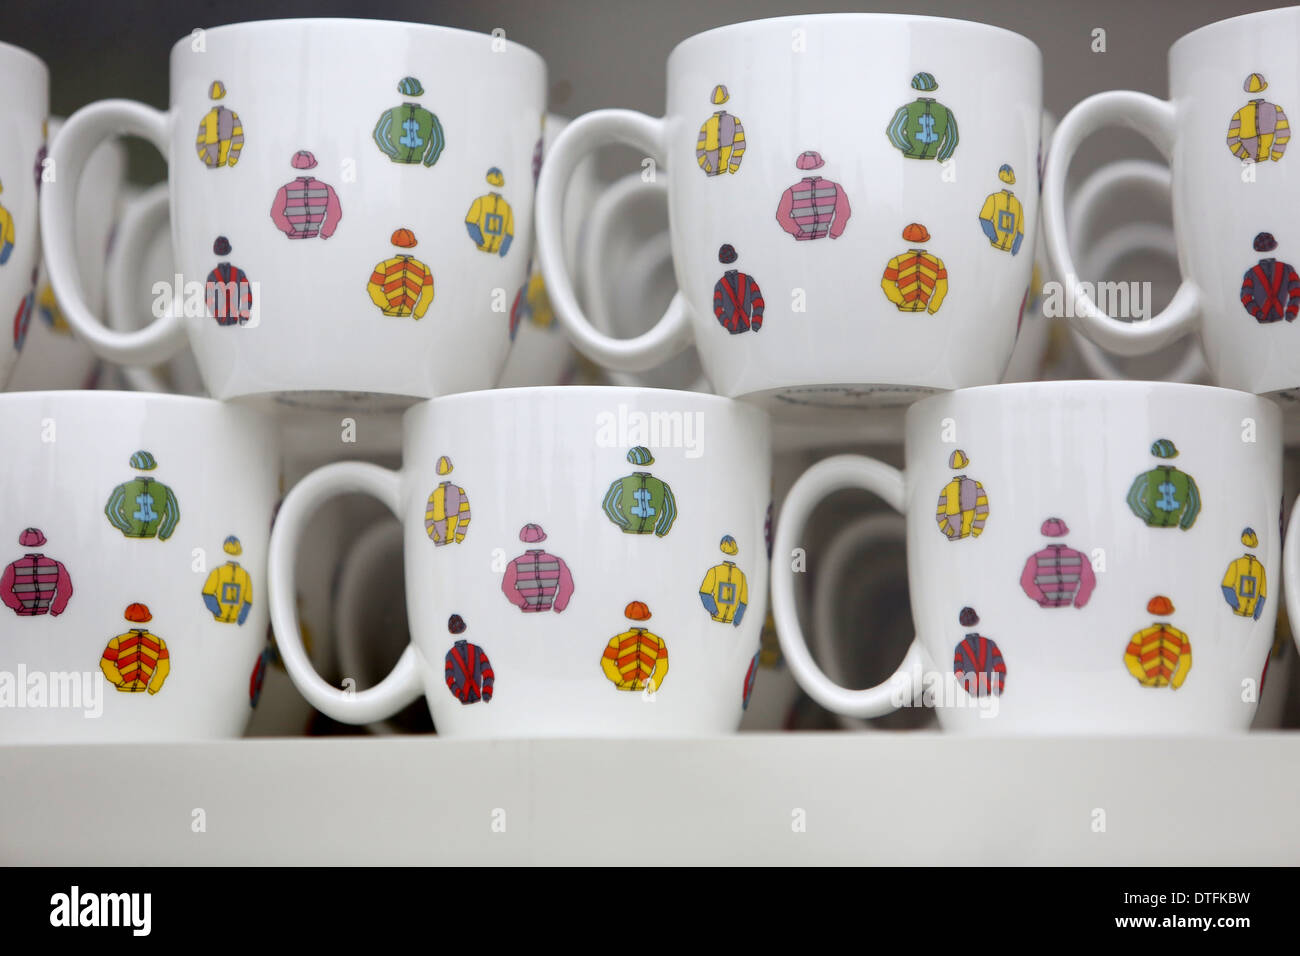 Ascot, United Kingdom, cups with racing outfit designs Stock Photo